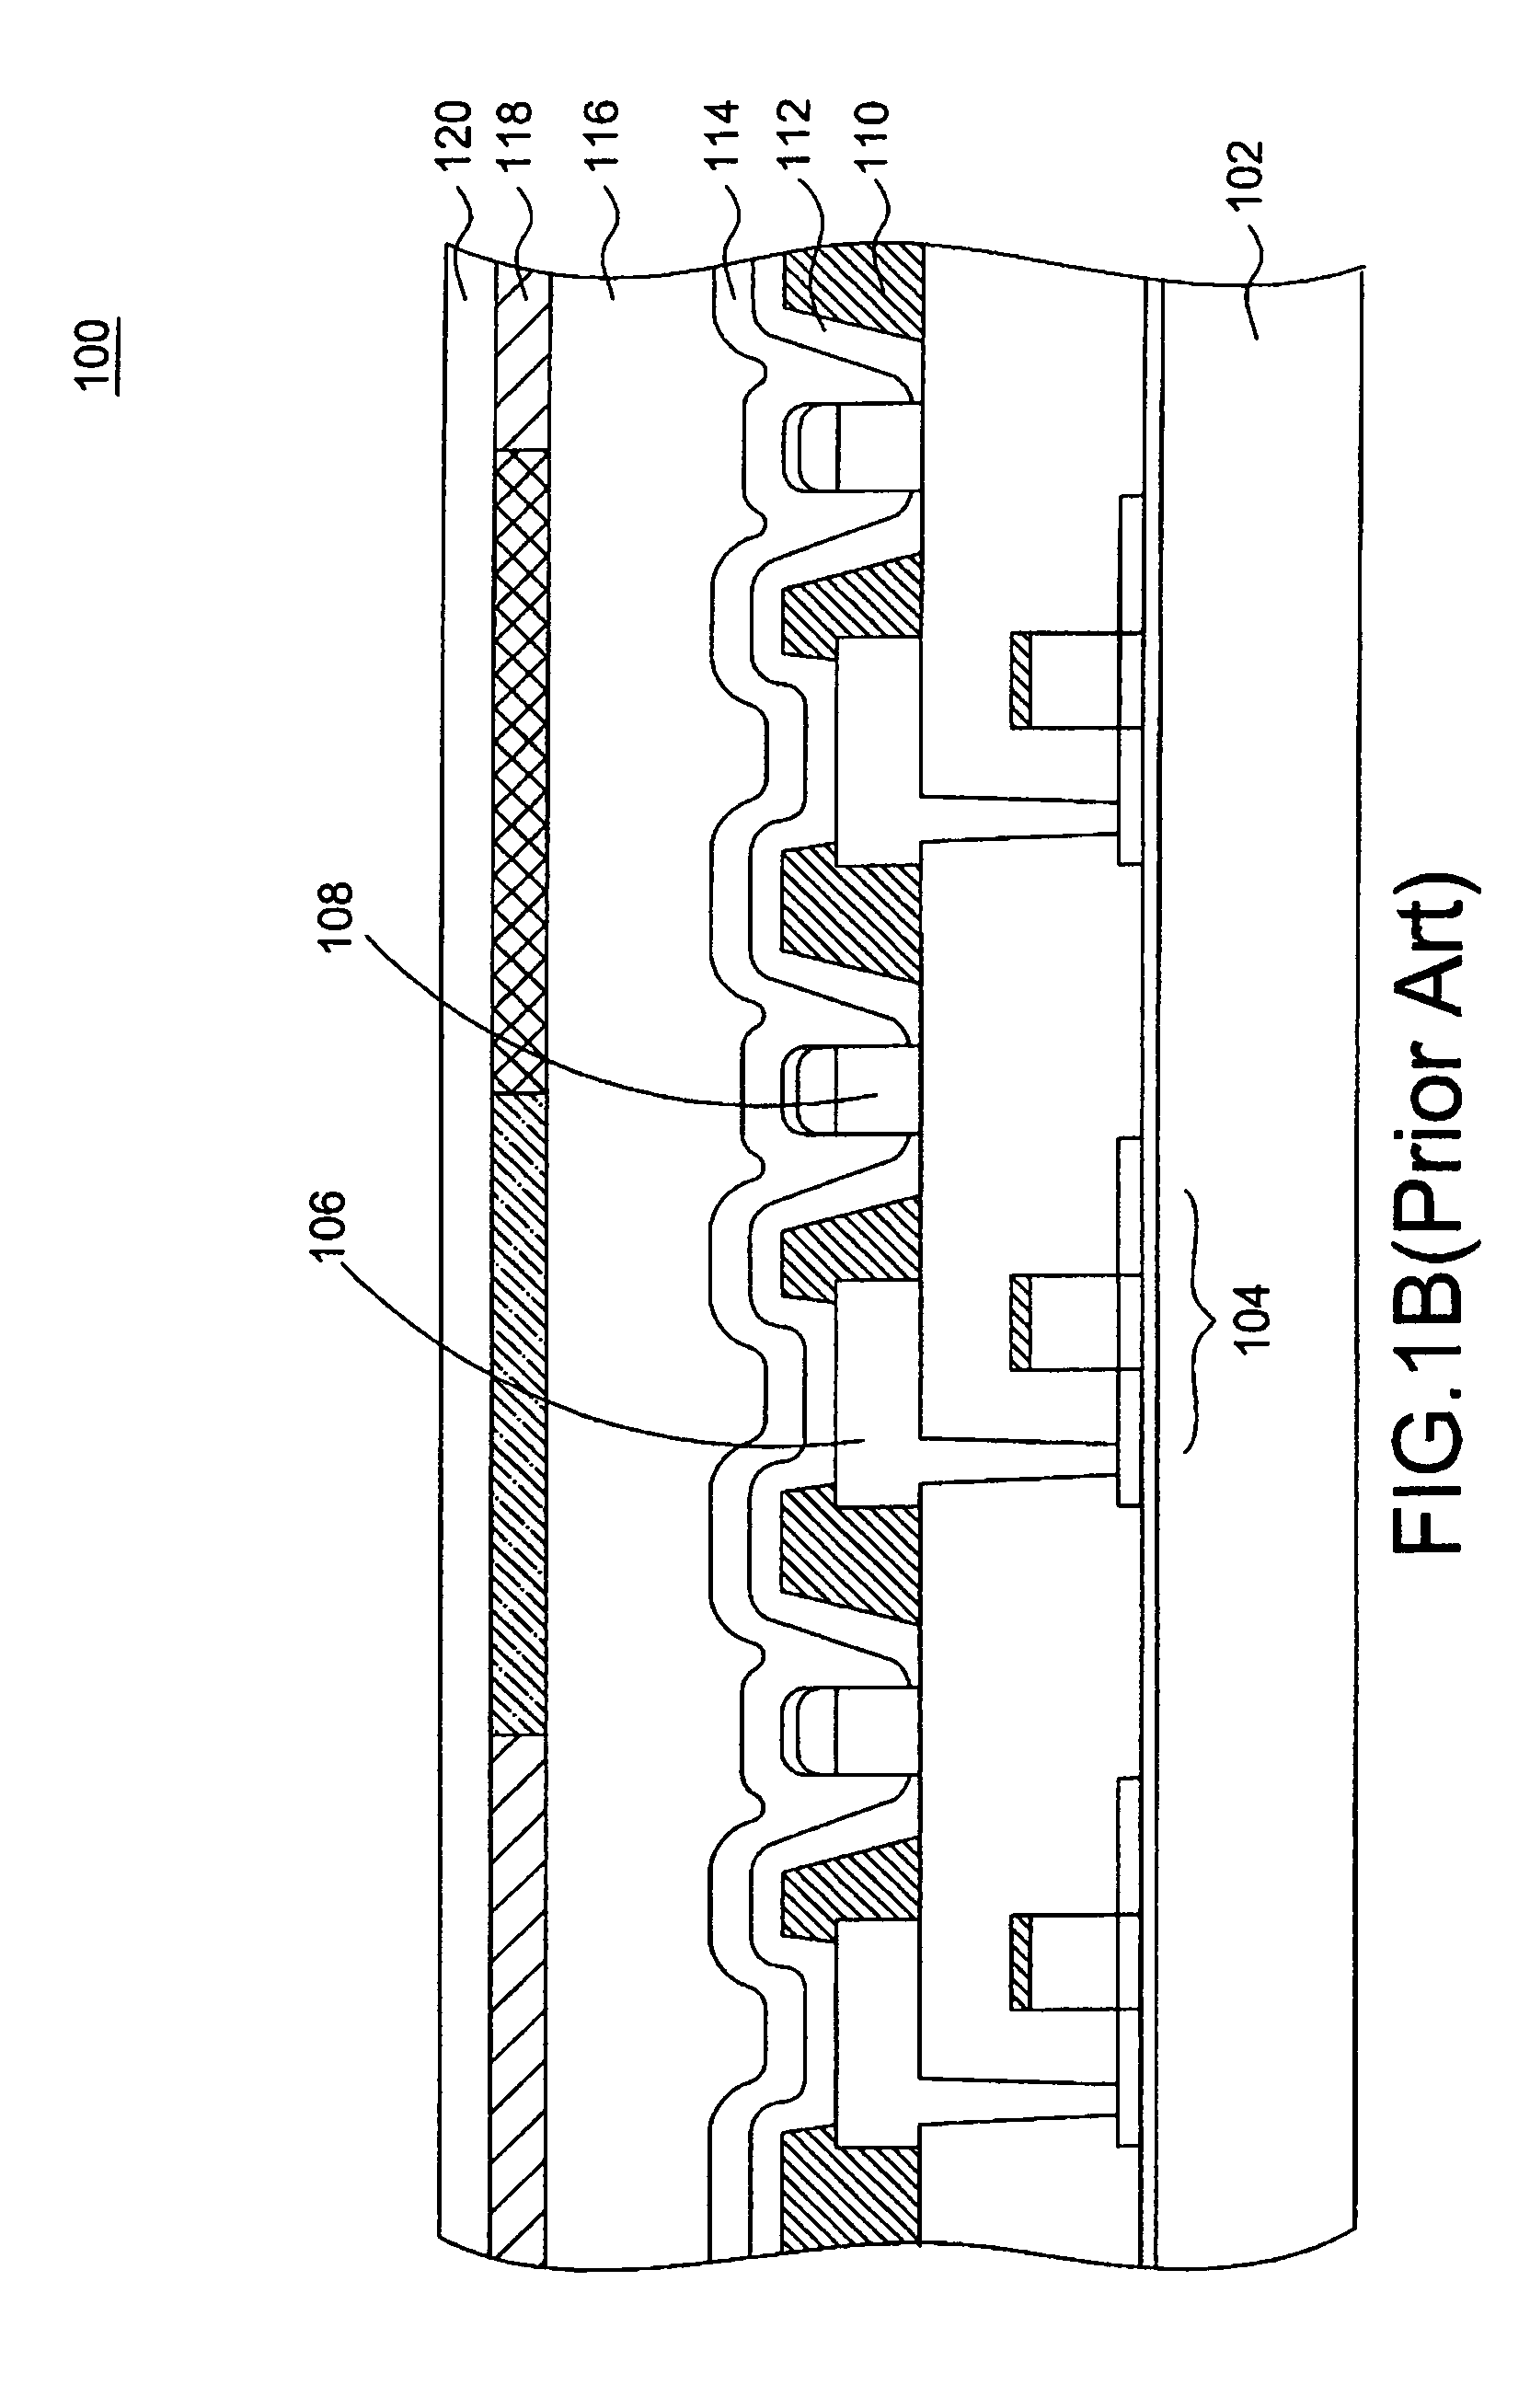 Organic light-emitting device, and methods of forming the same and electronic devices having the same